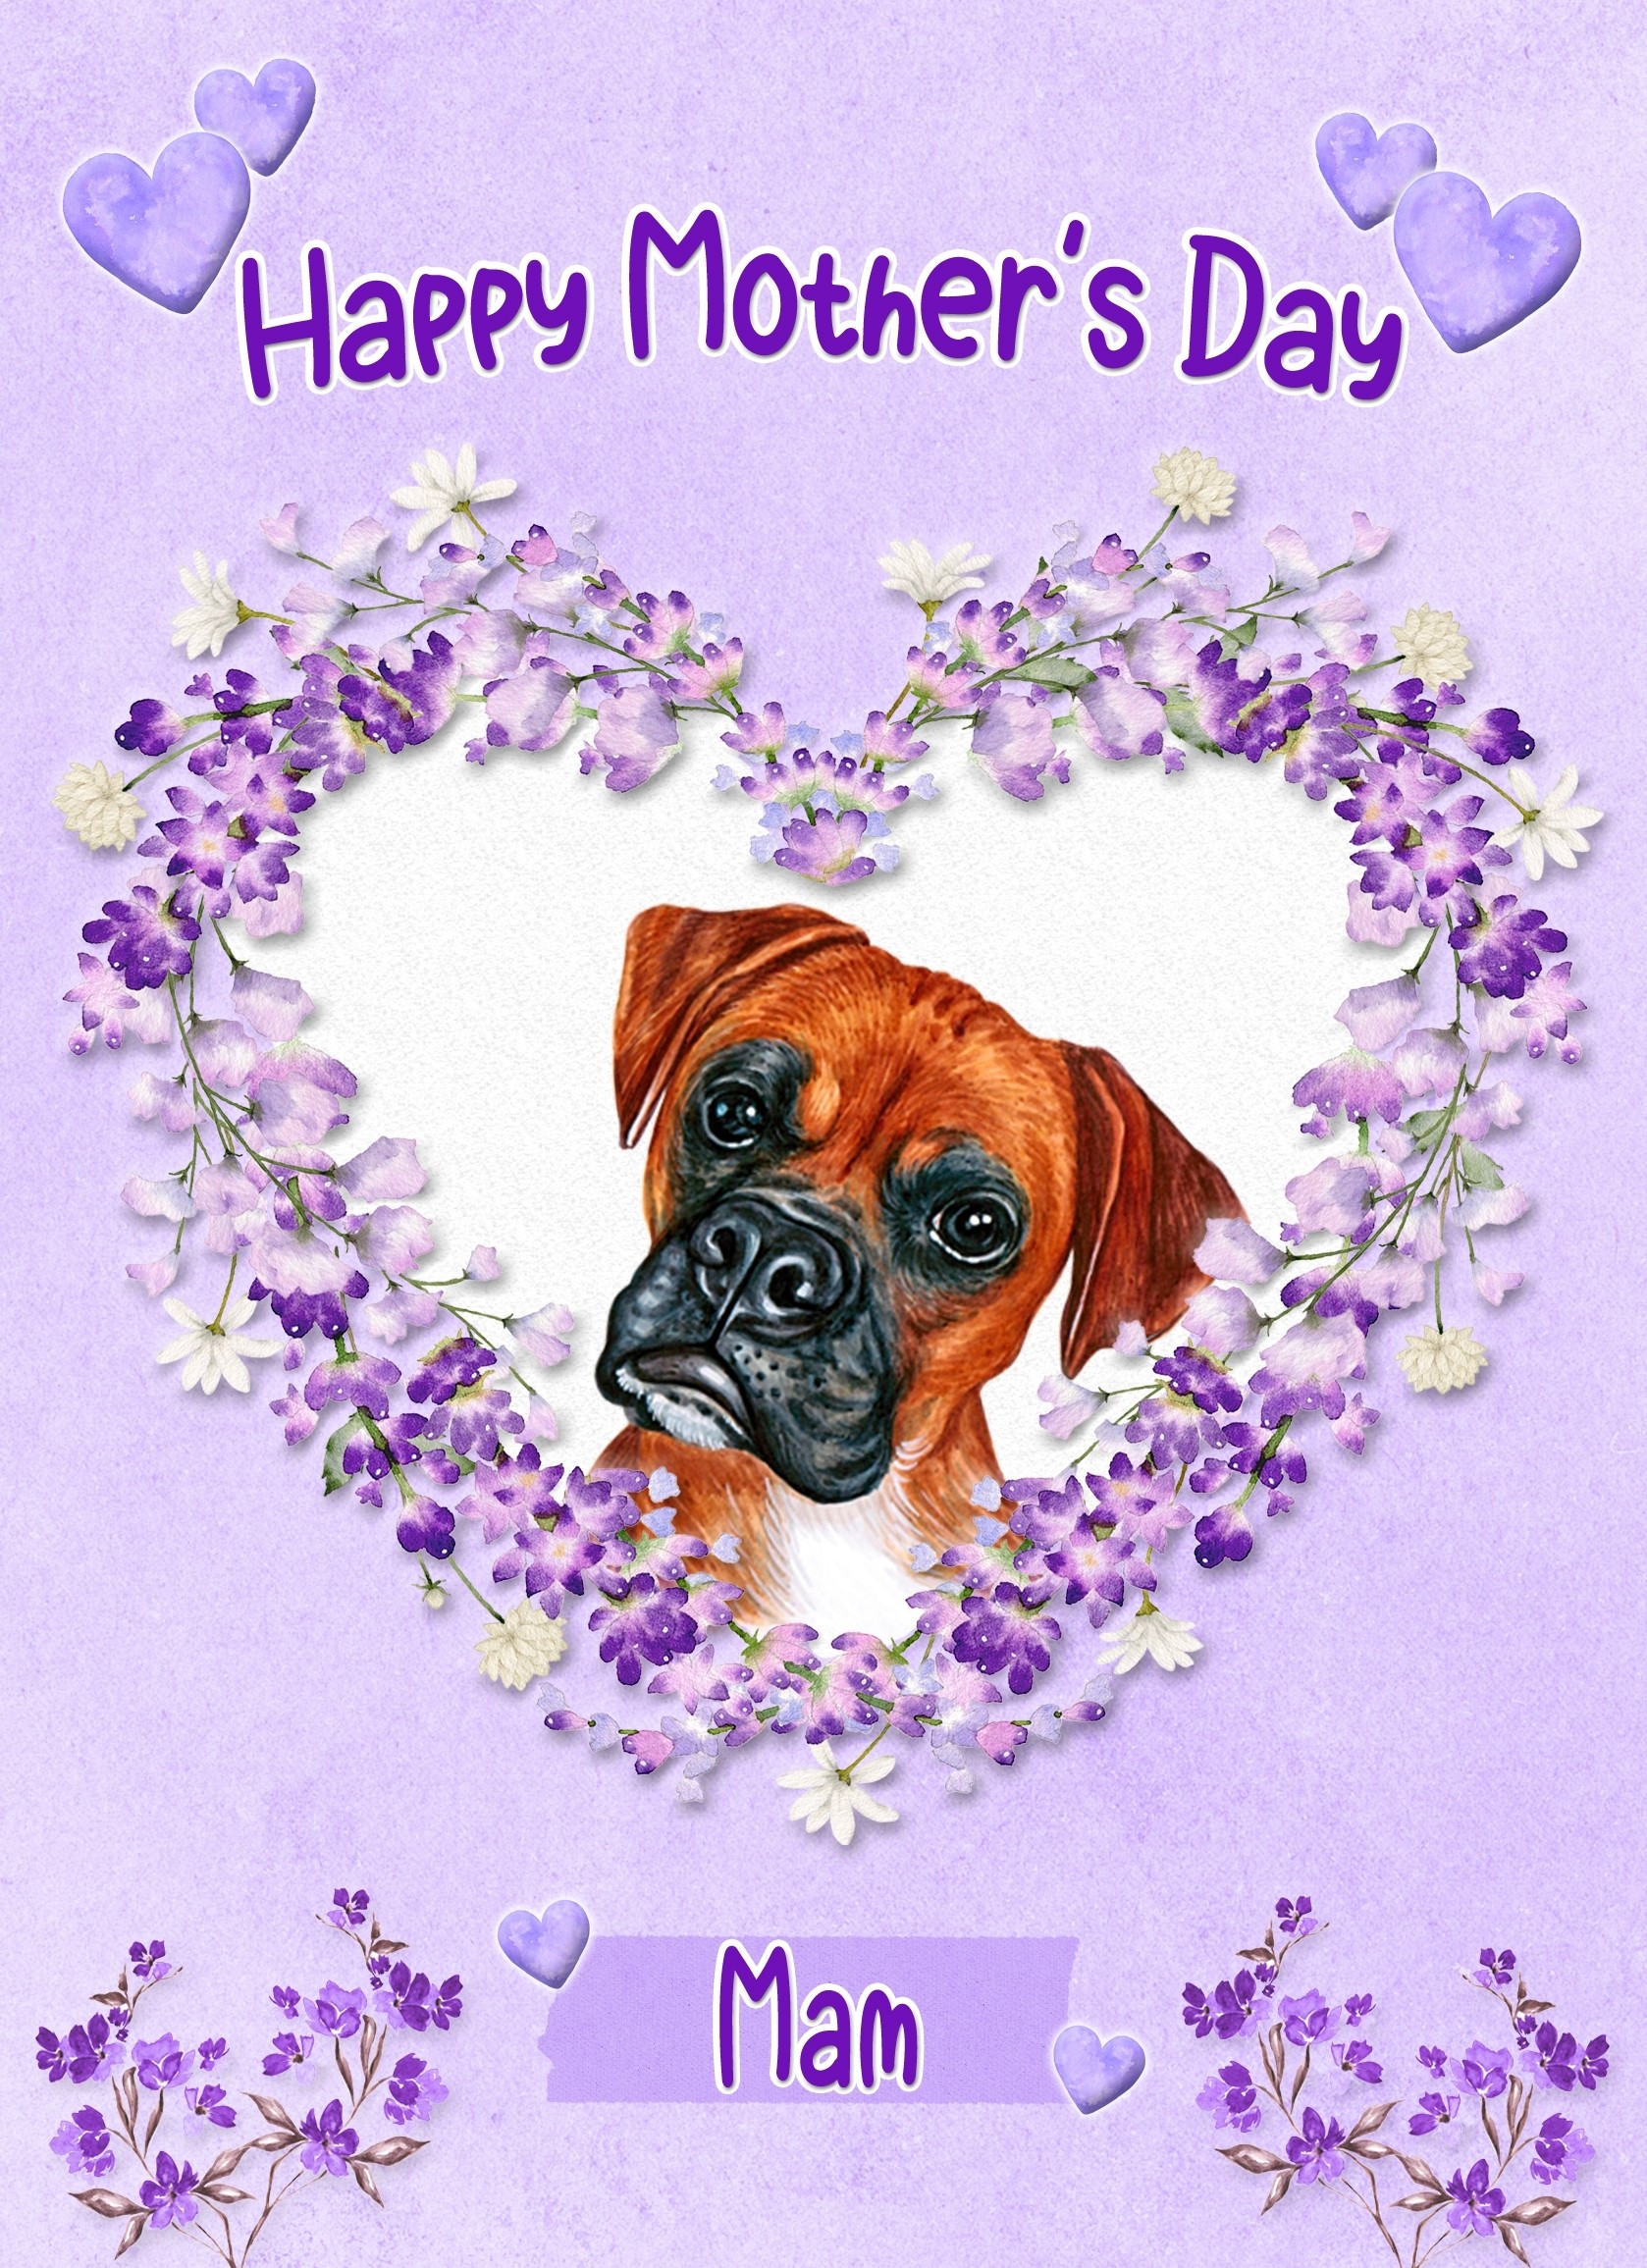 Boxer Dog Mothers Day Card (Happy Mothers, Mam)